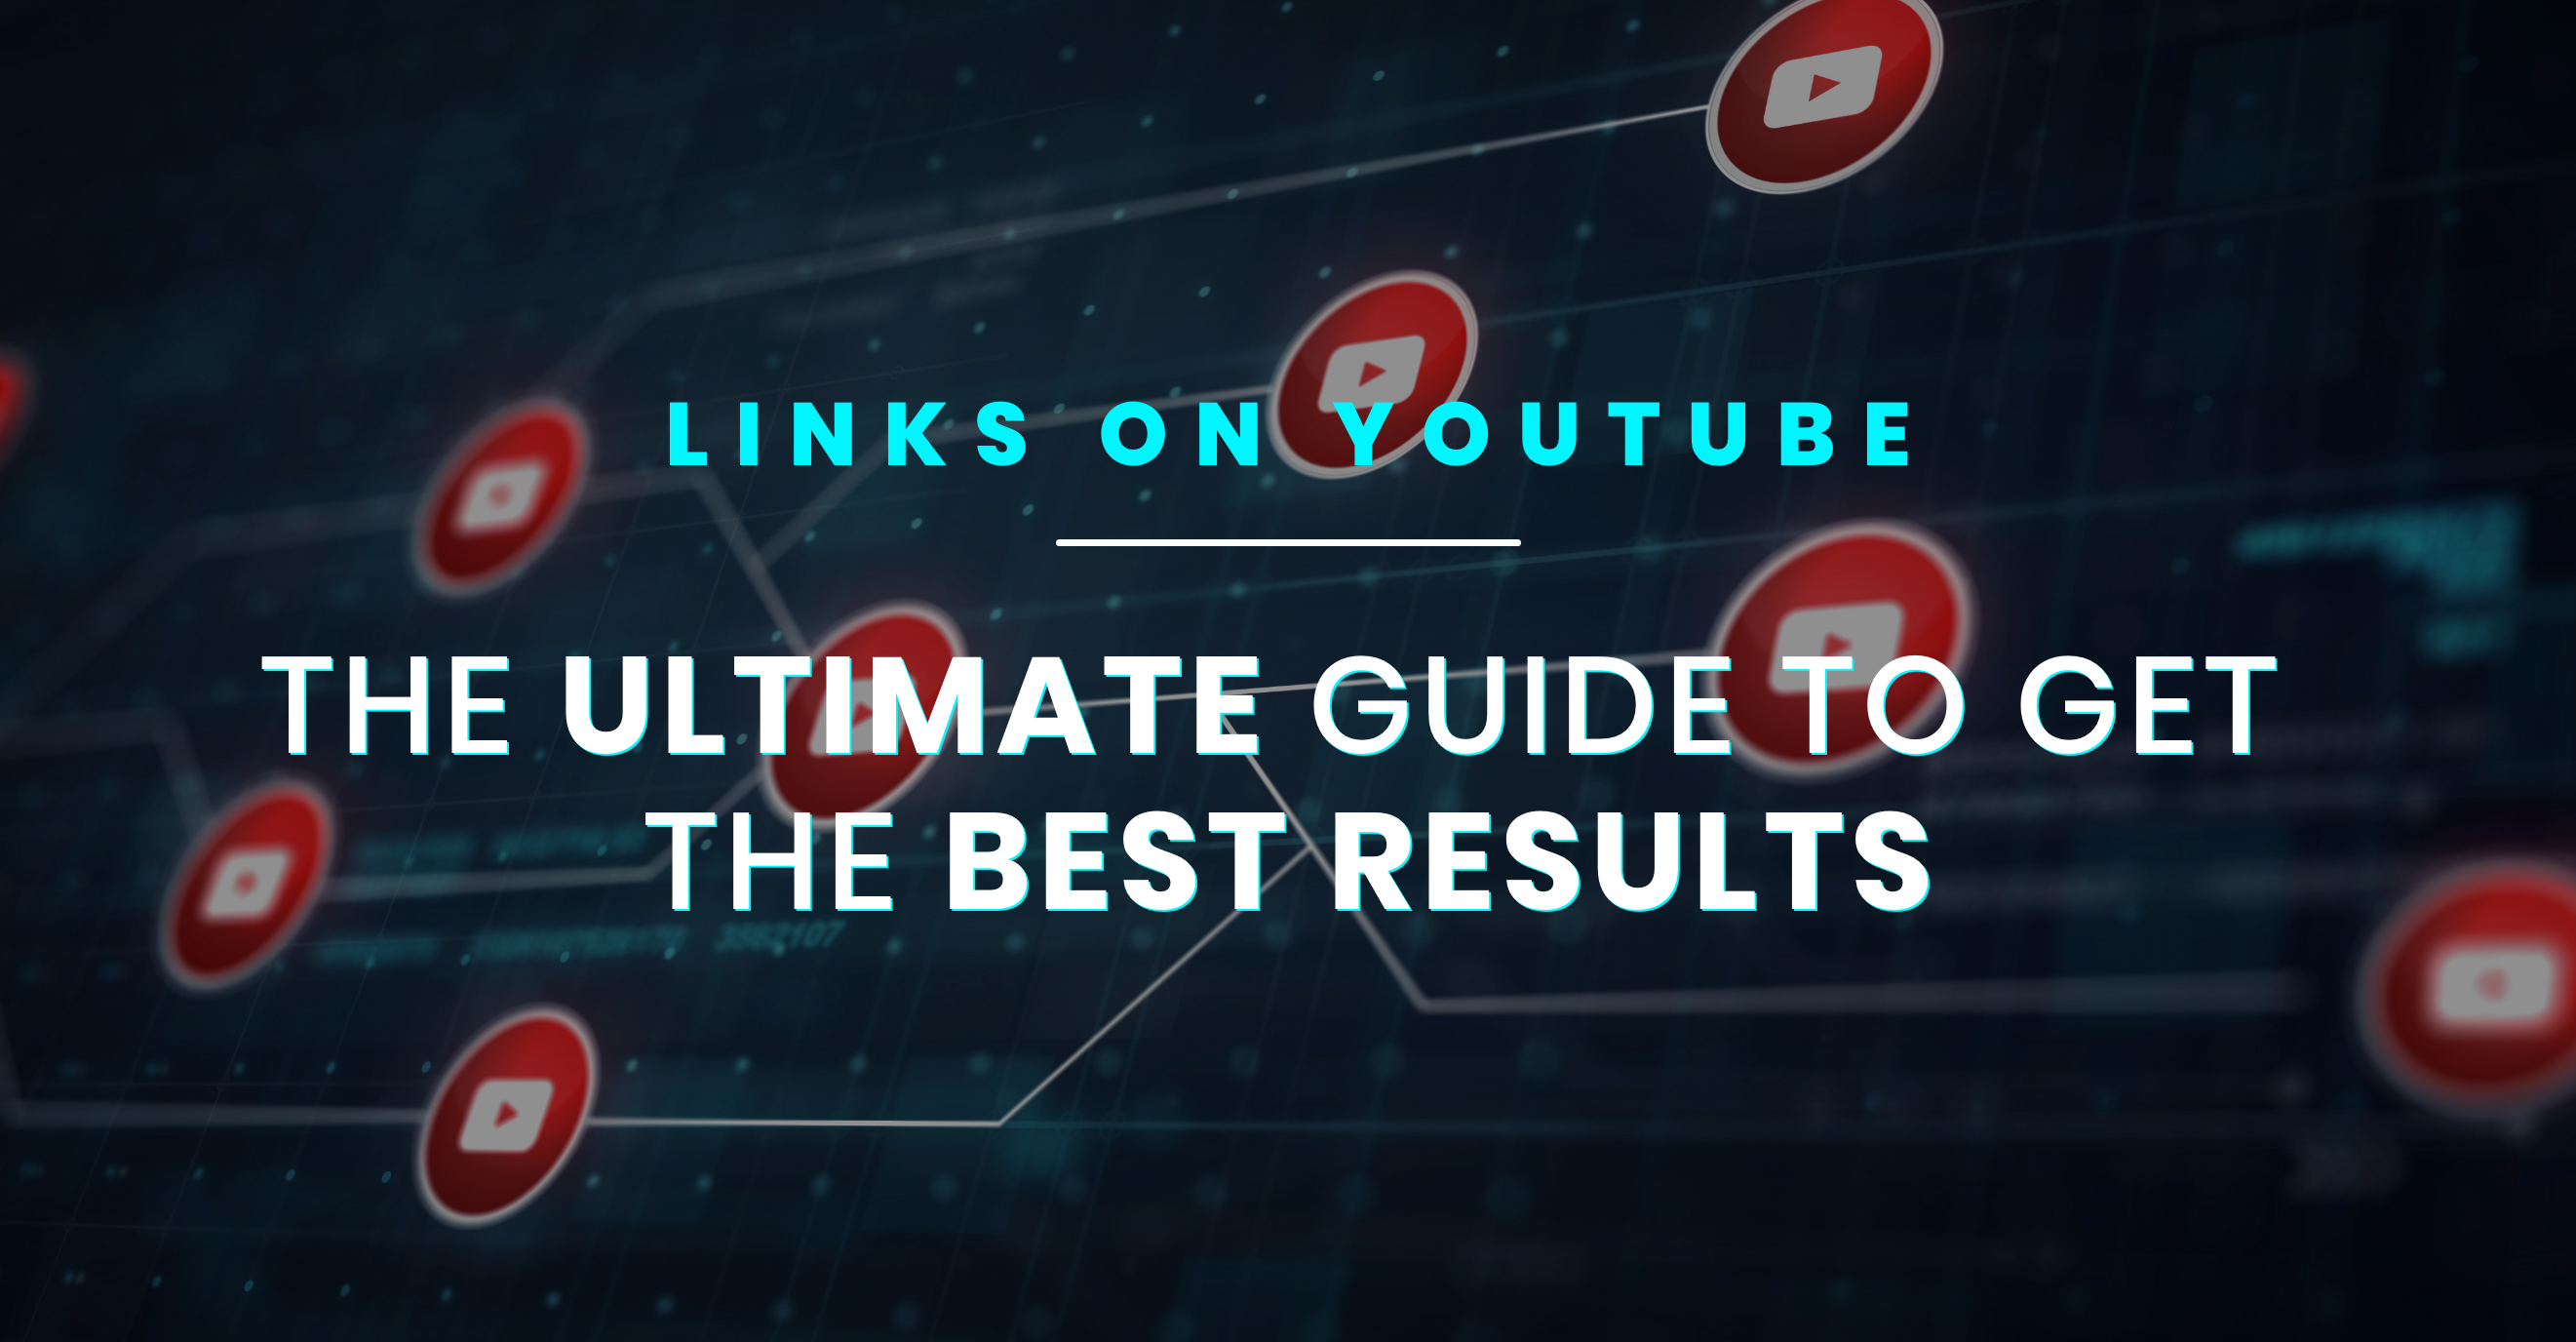 Links On Youtube: The Ultimate Guide